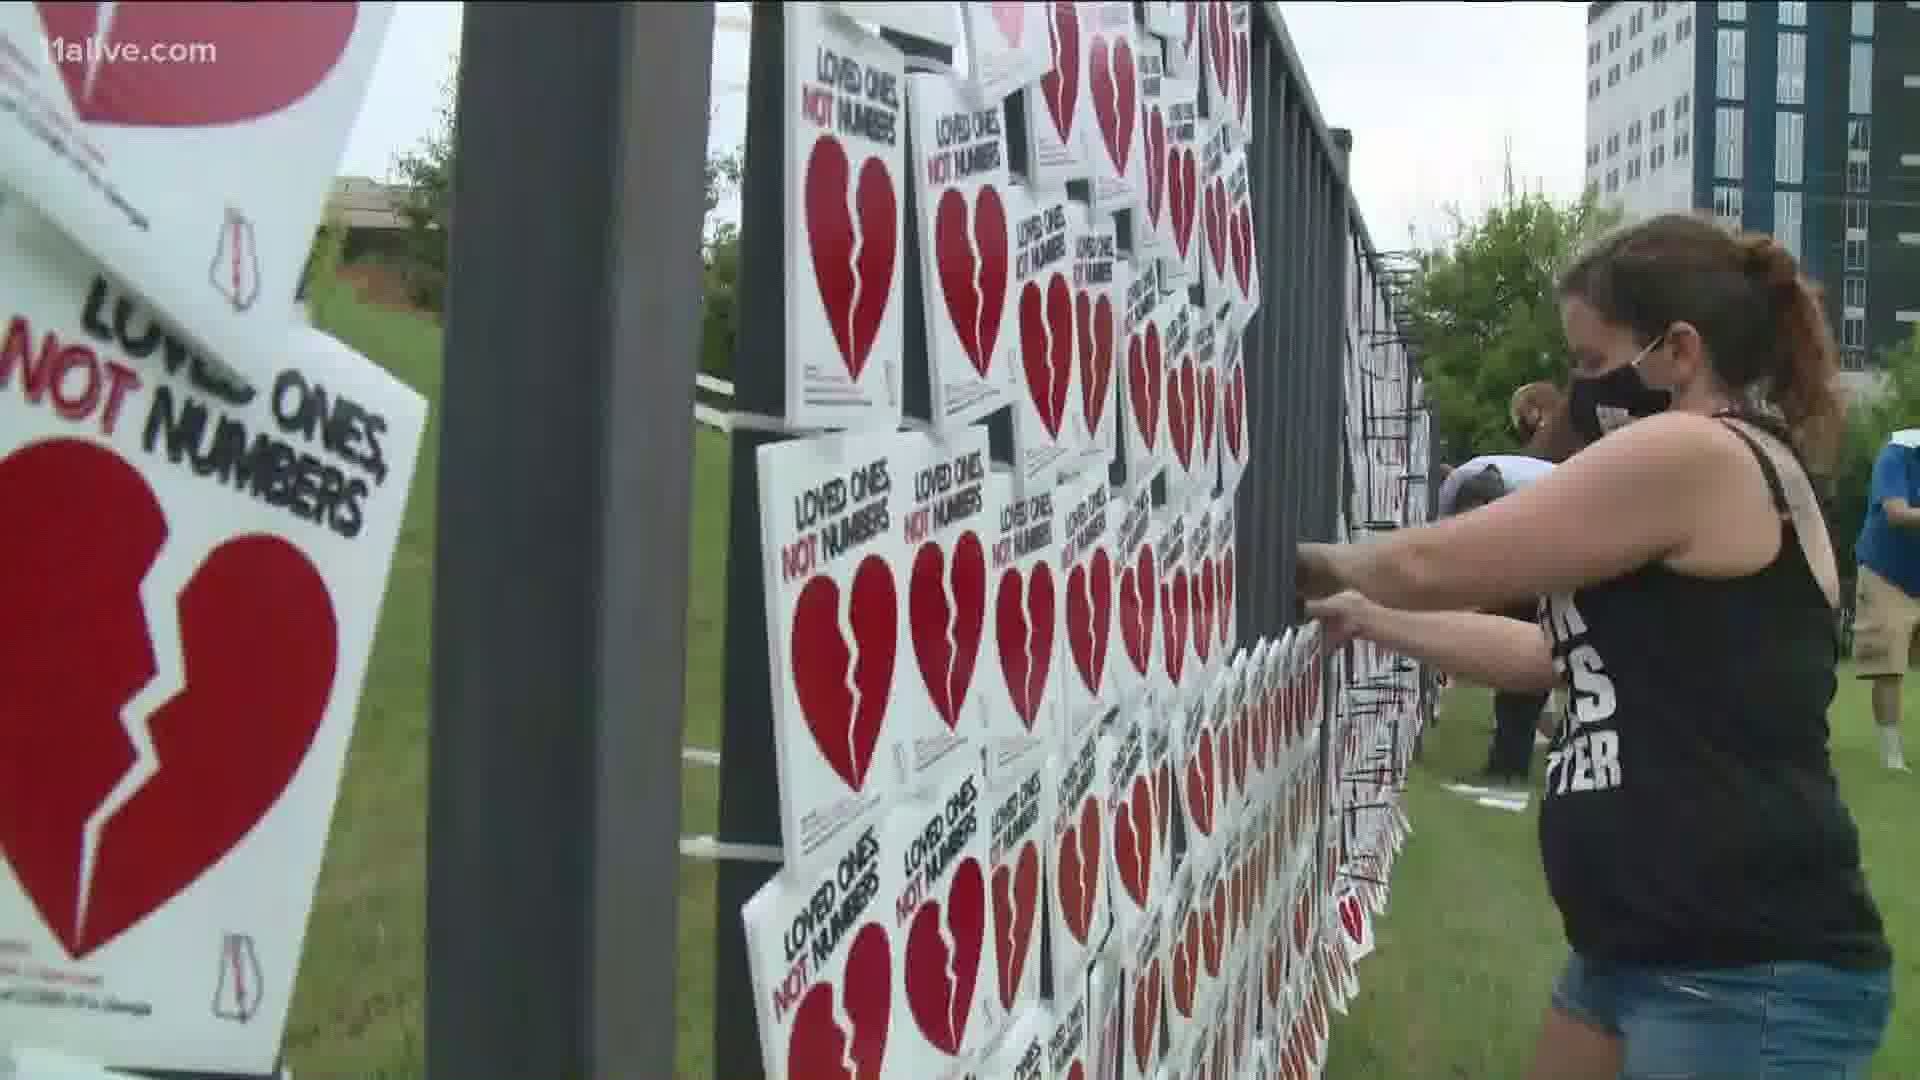 To honor the over 5,000 people who have died from the virus in the state, a makeshift memorial was erected near the Georgia Aquarium.